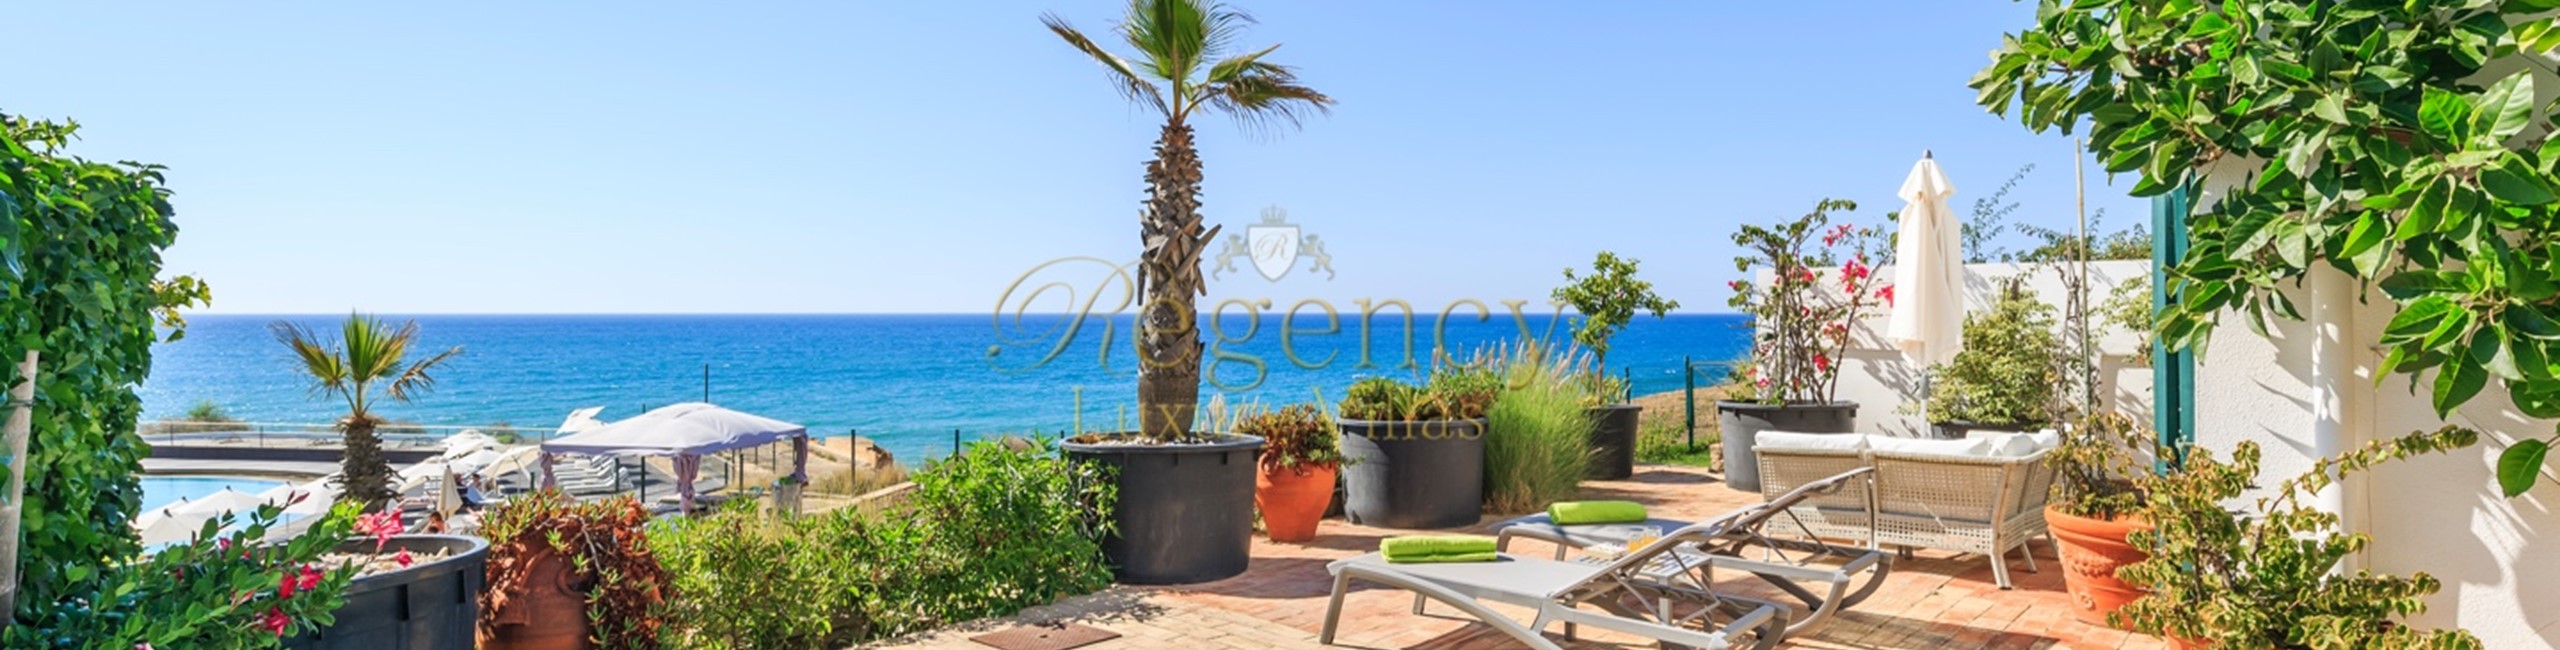 Villa To Rent With Pool And Sea View In Vale Do Lobo